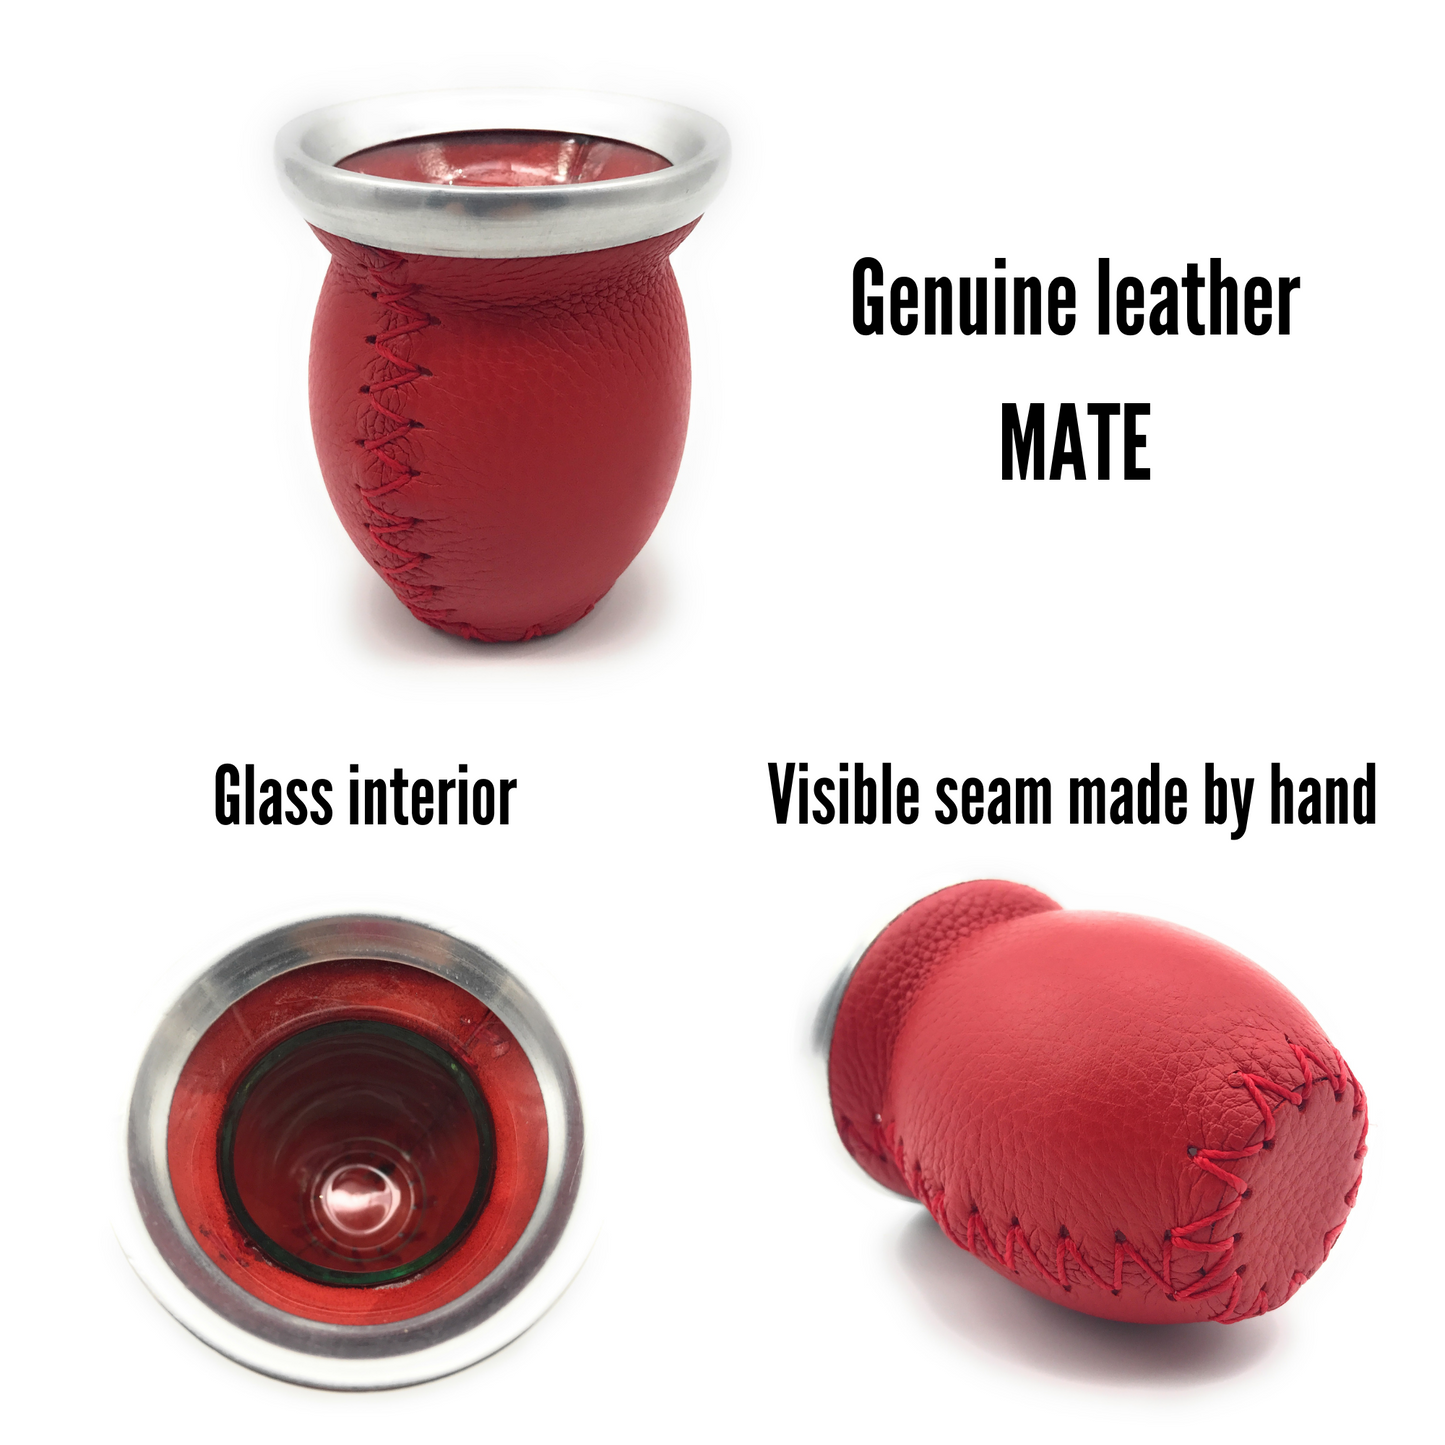 Leather & Glass Mate Gourd  & stainless steel bombilla | 5 colors